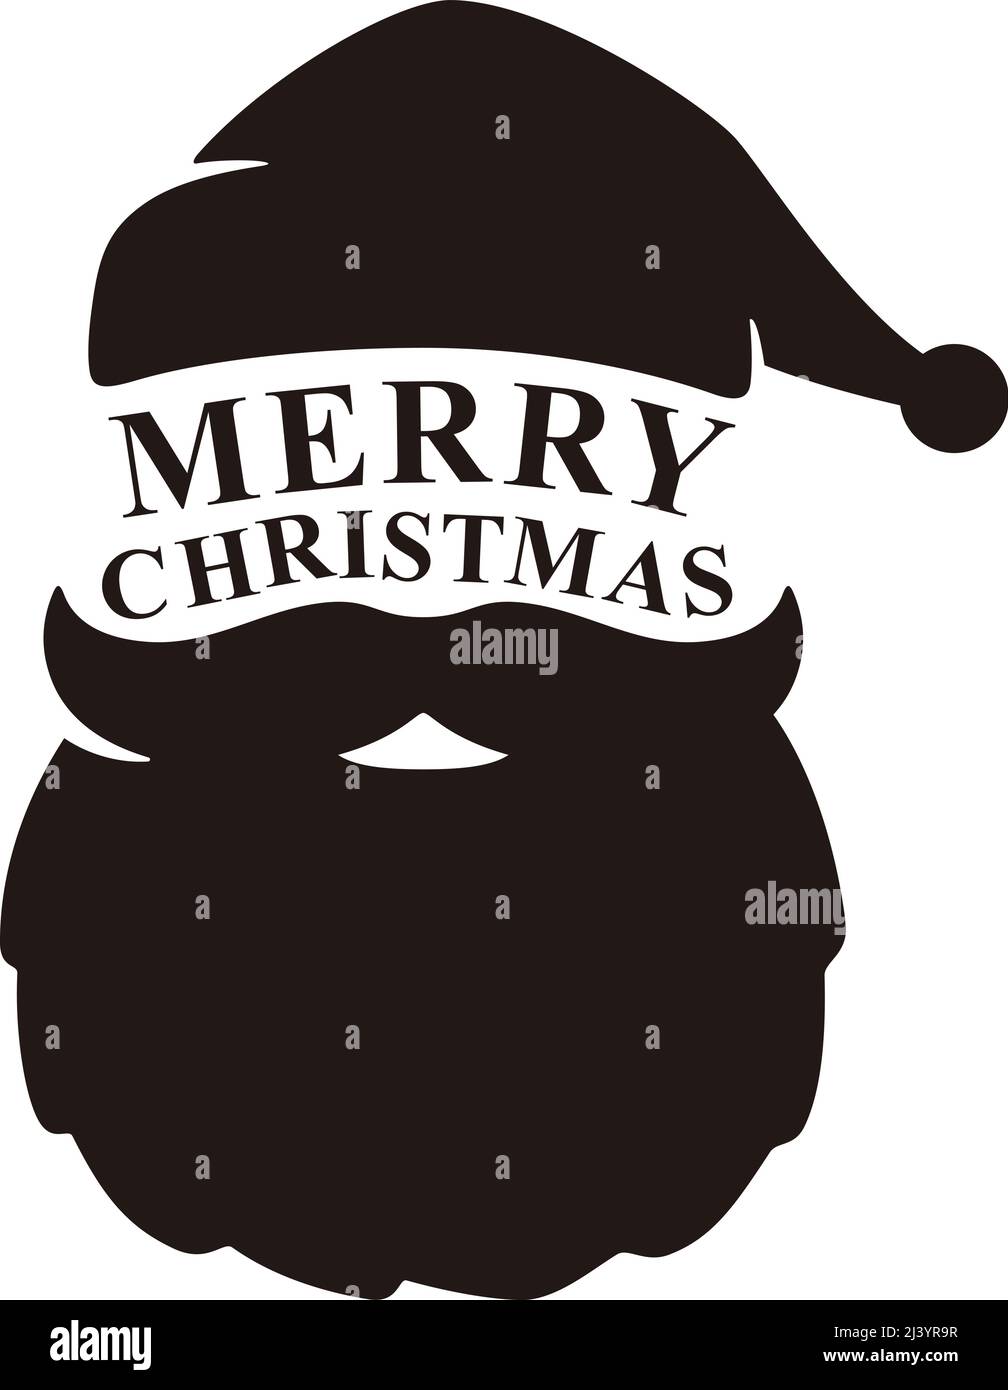 Merry Christmas concept with Christmas hat and Santa white beard Stock Vector